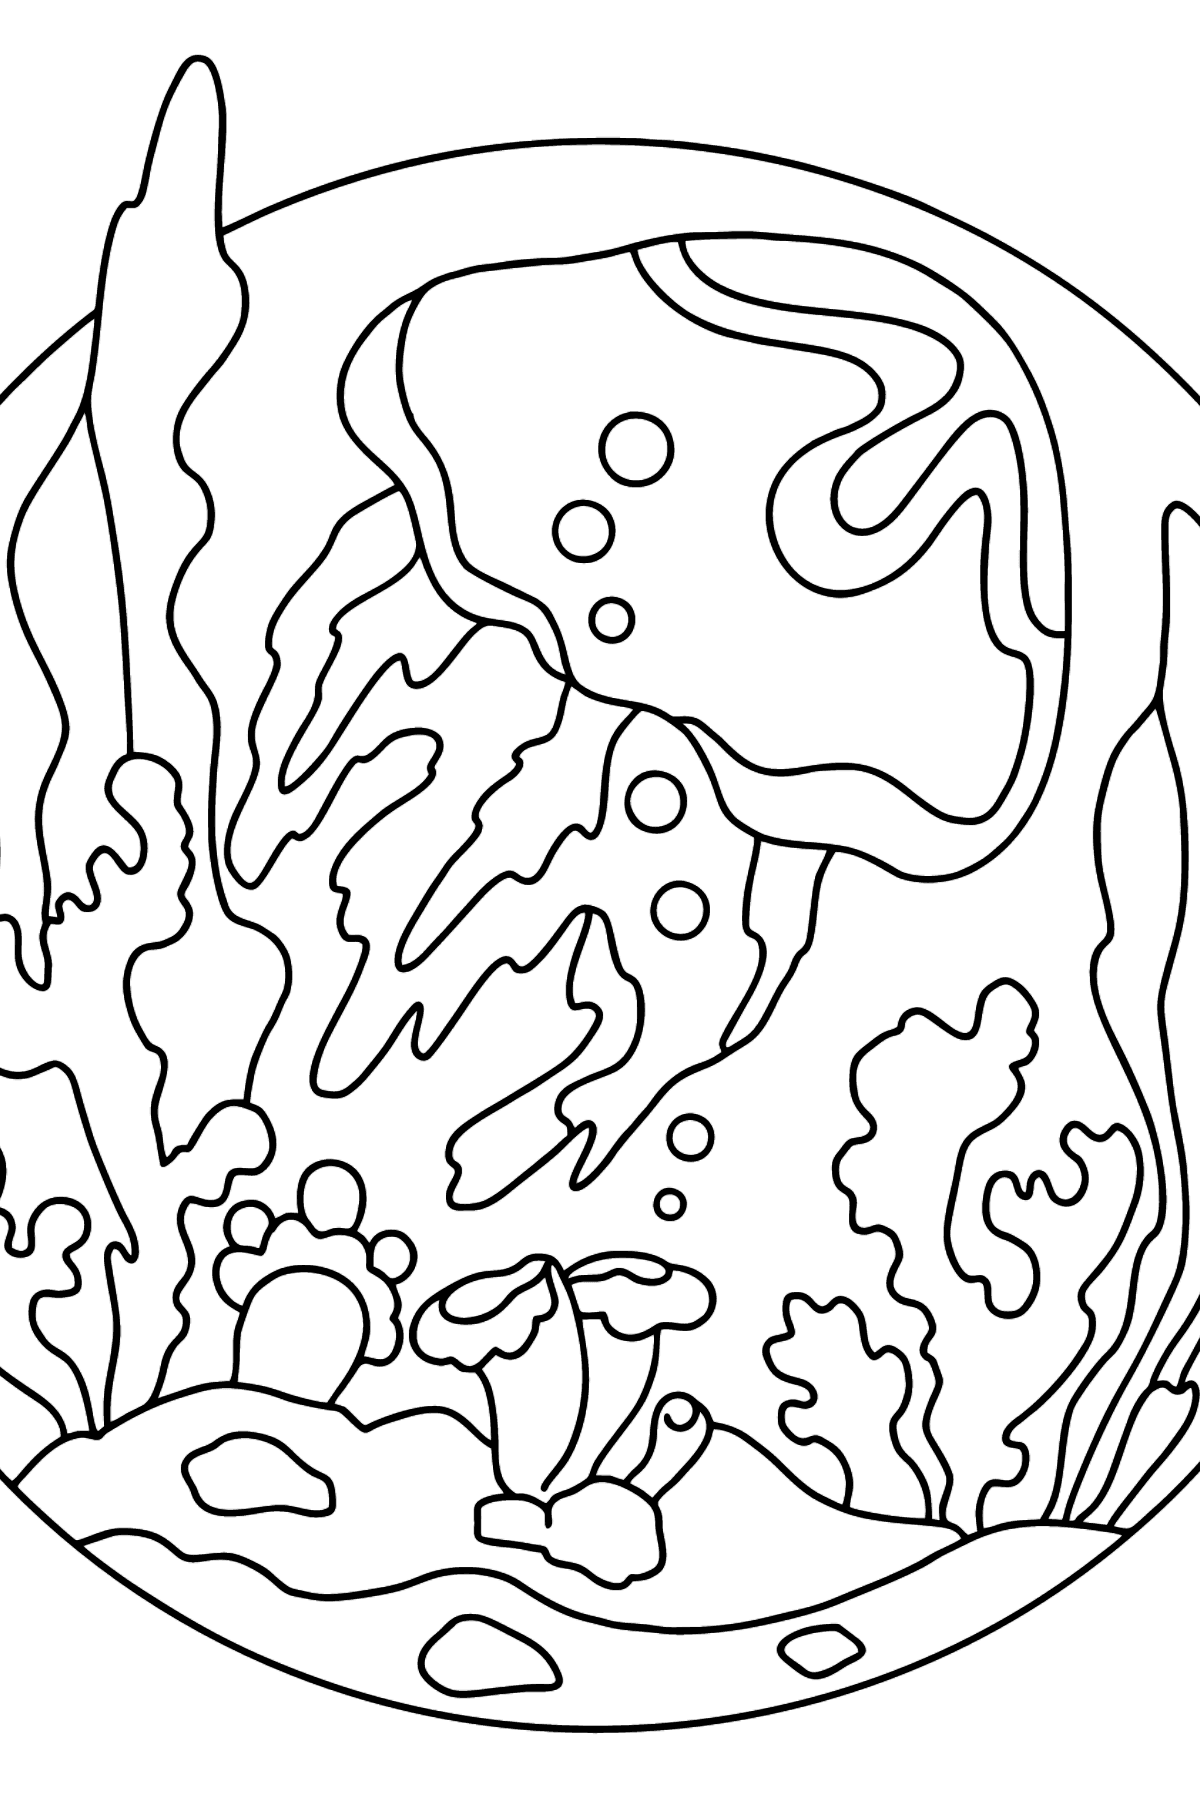 A Multicolored Jellyfish Coloring Page - Coloring Pages for Kids